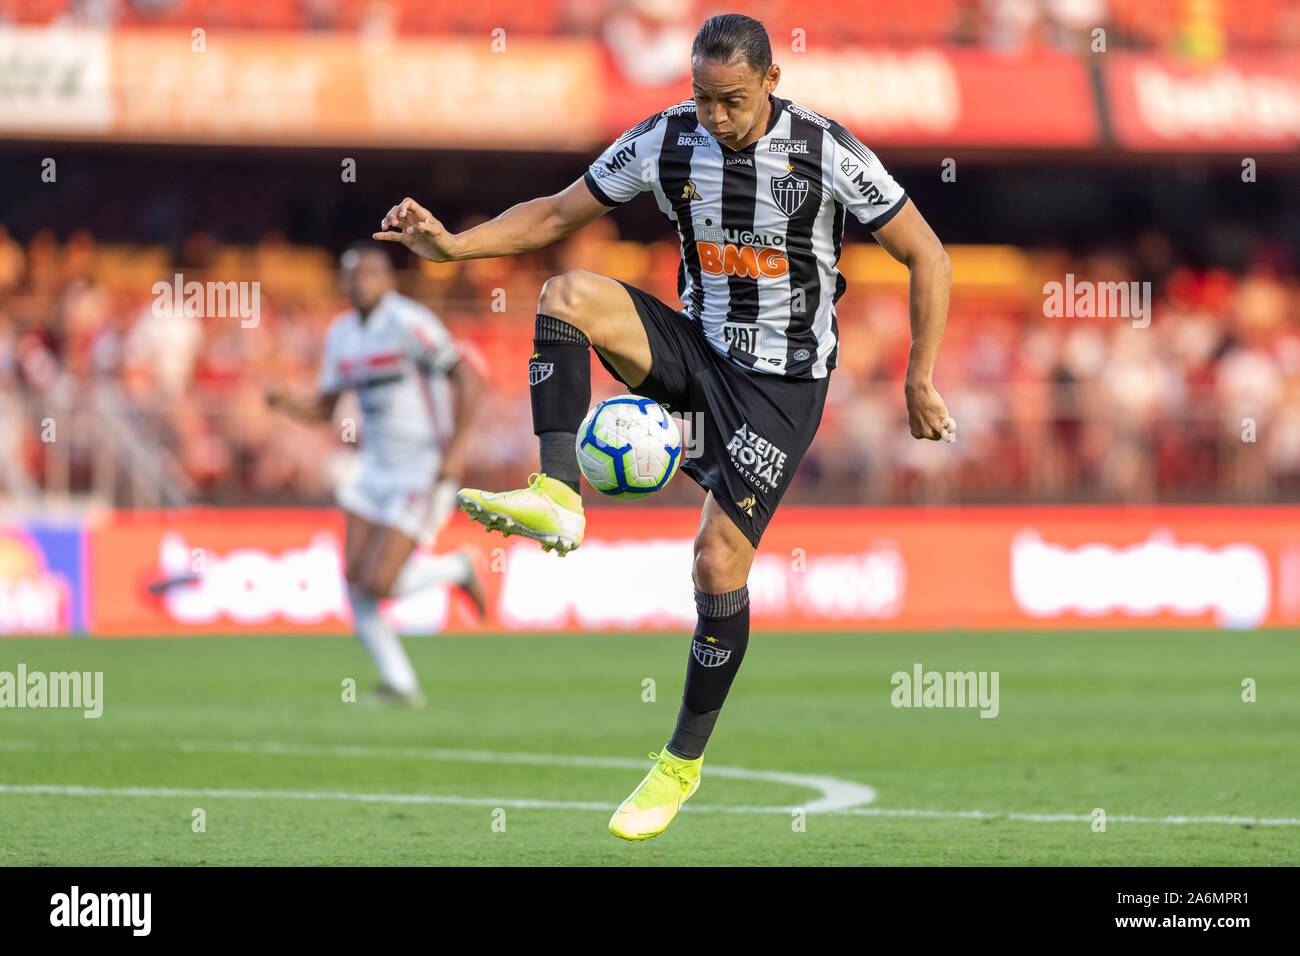 Sao Paulo, Brazil. October 27th 2019:  Atletico striker Ricardo Oliveira during his club's game against Sao Paulo. The game won by Sao Paulo 2-0 took place at Morumbi Stadium in Sao Paulo and was for the 28th round of the Brazilian league known as 'Campeonato Brasileiro'. Stock Photo